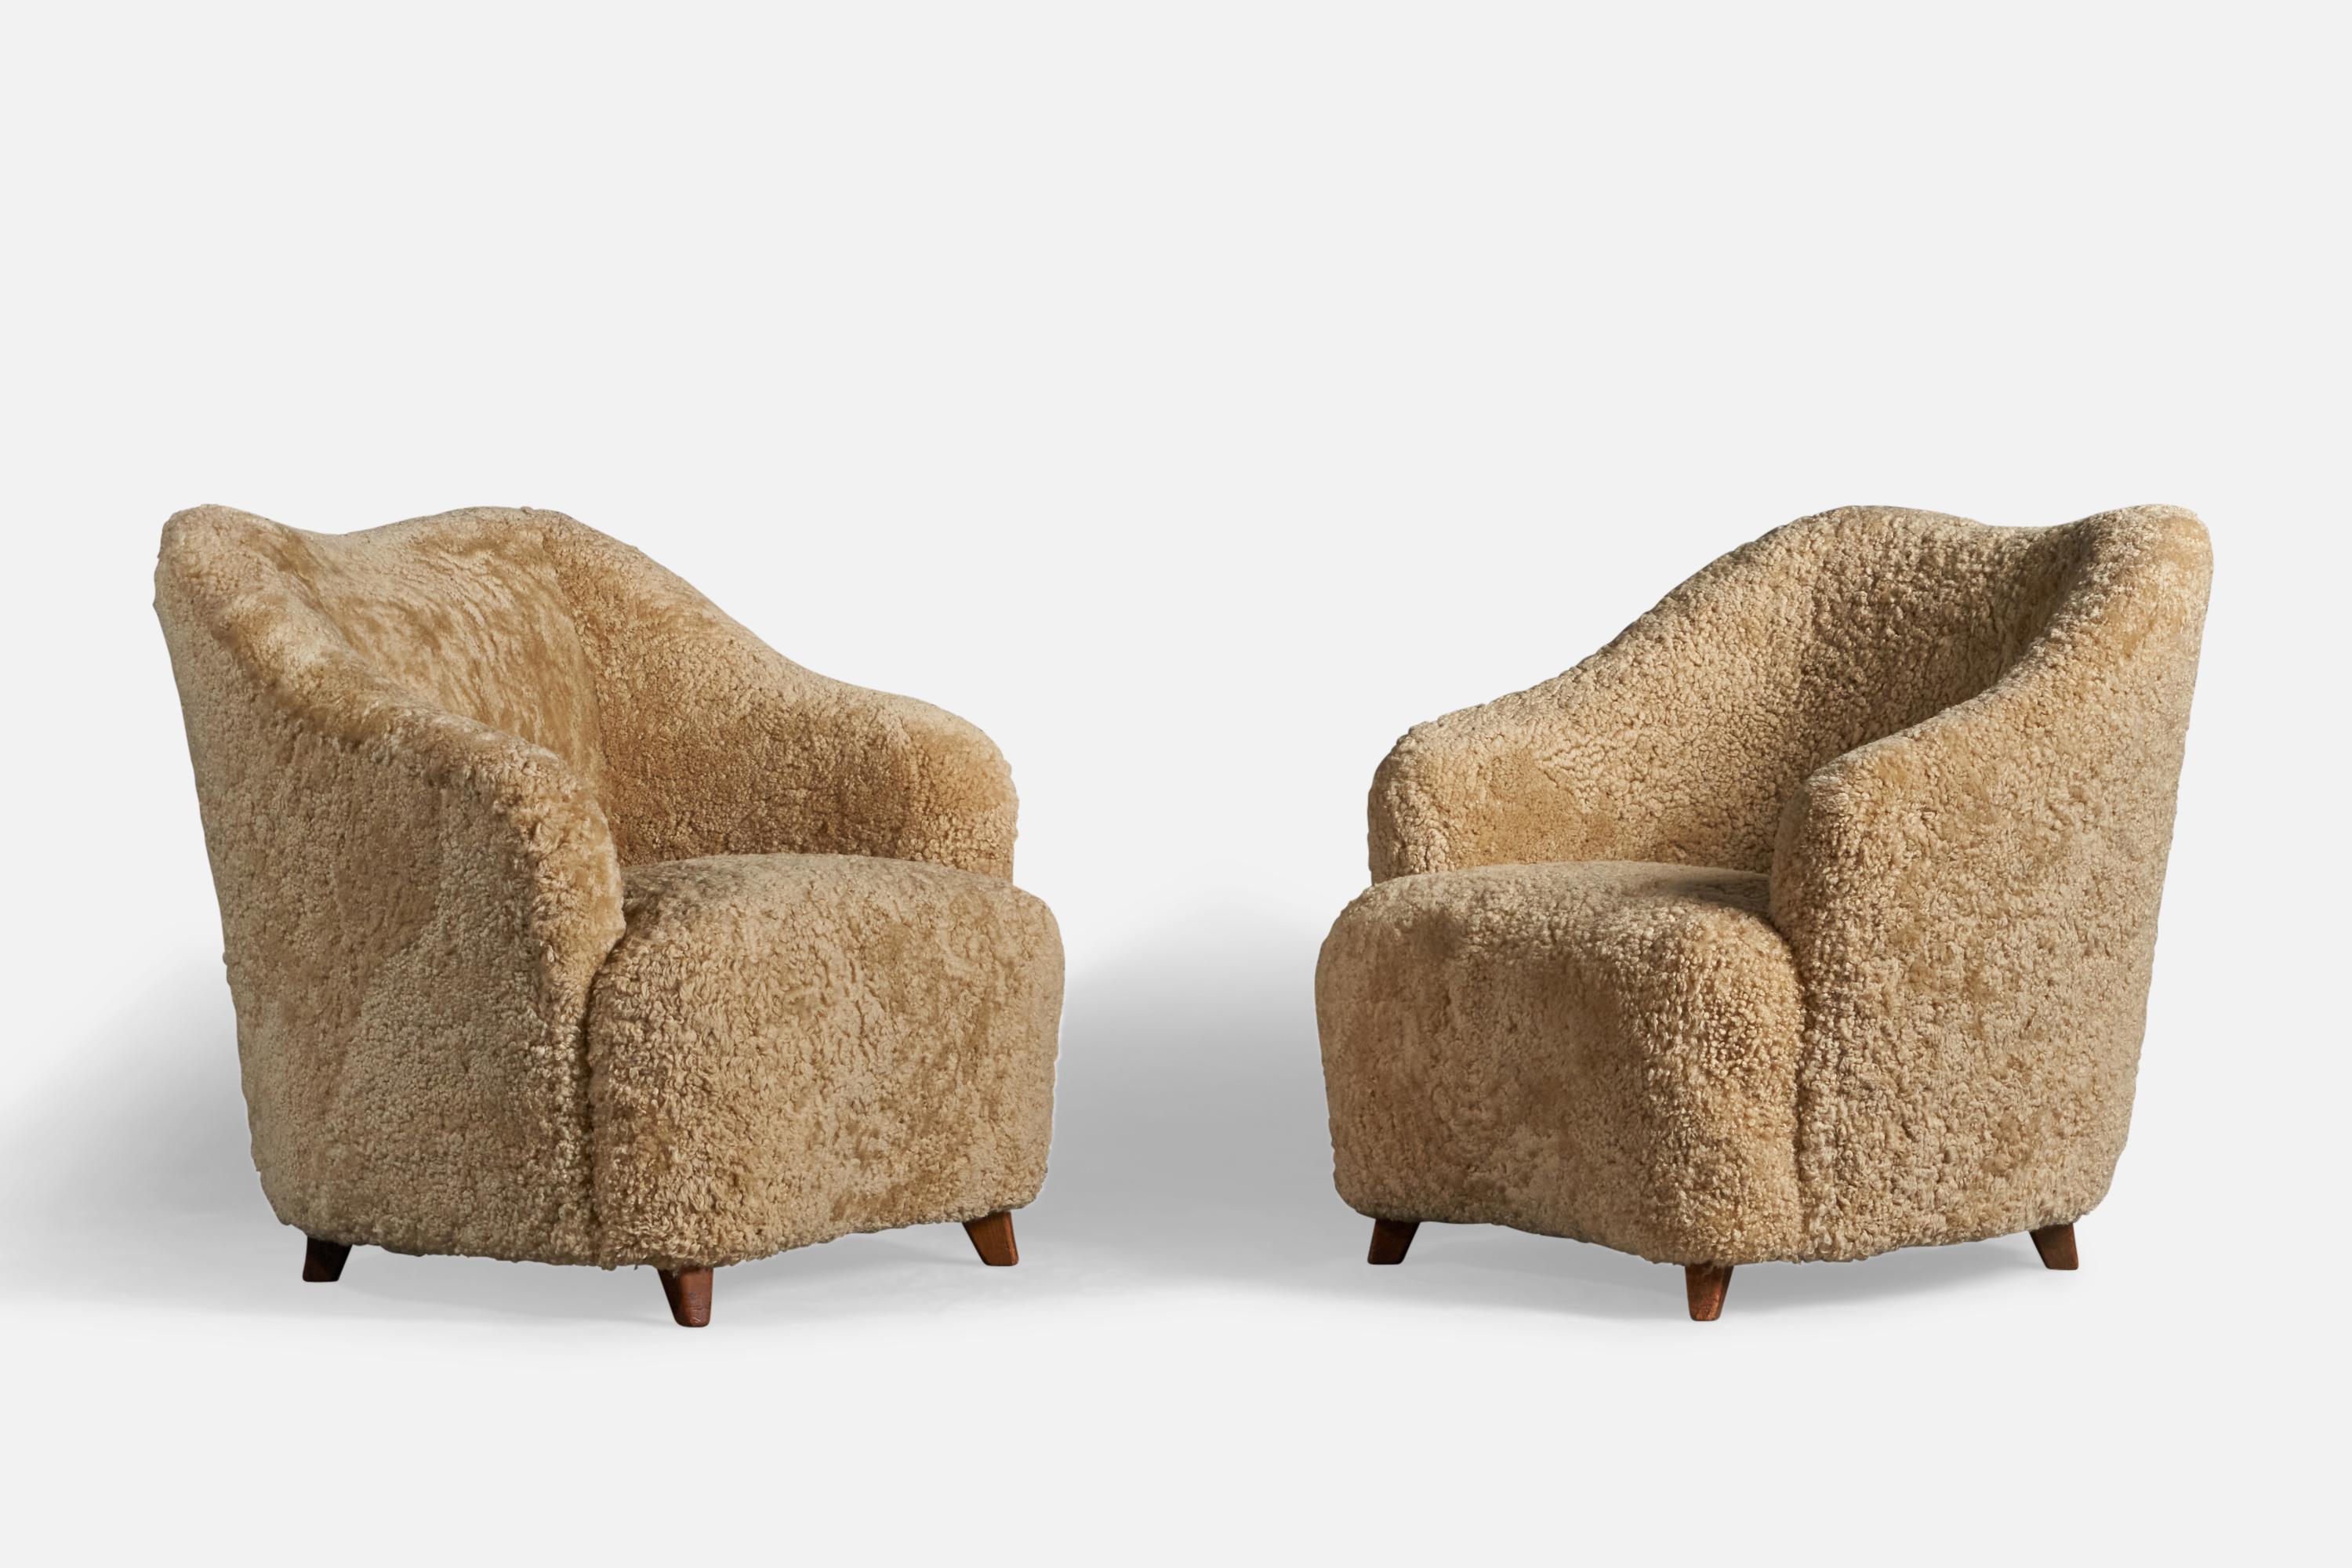 A pair of wood and beige shearling lounge chairs, design attributed to Gio Ponti, presumably produced by Casa e Giardino, Italy, 1940s.
